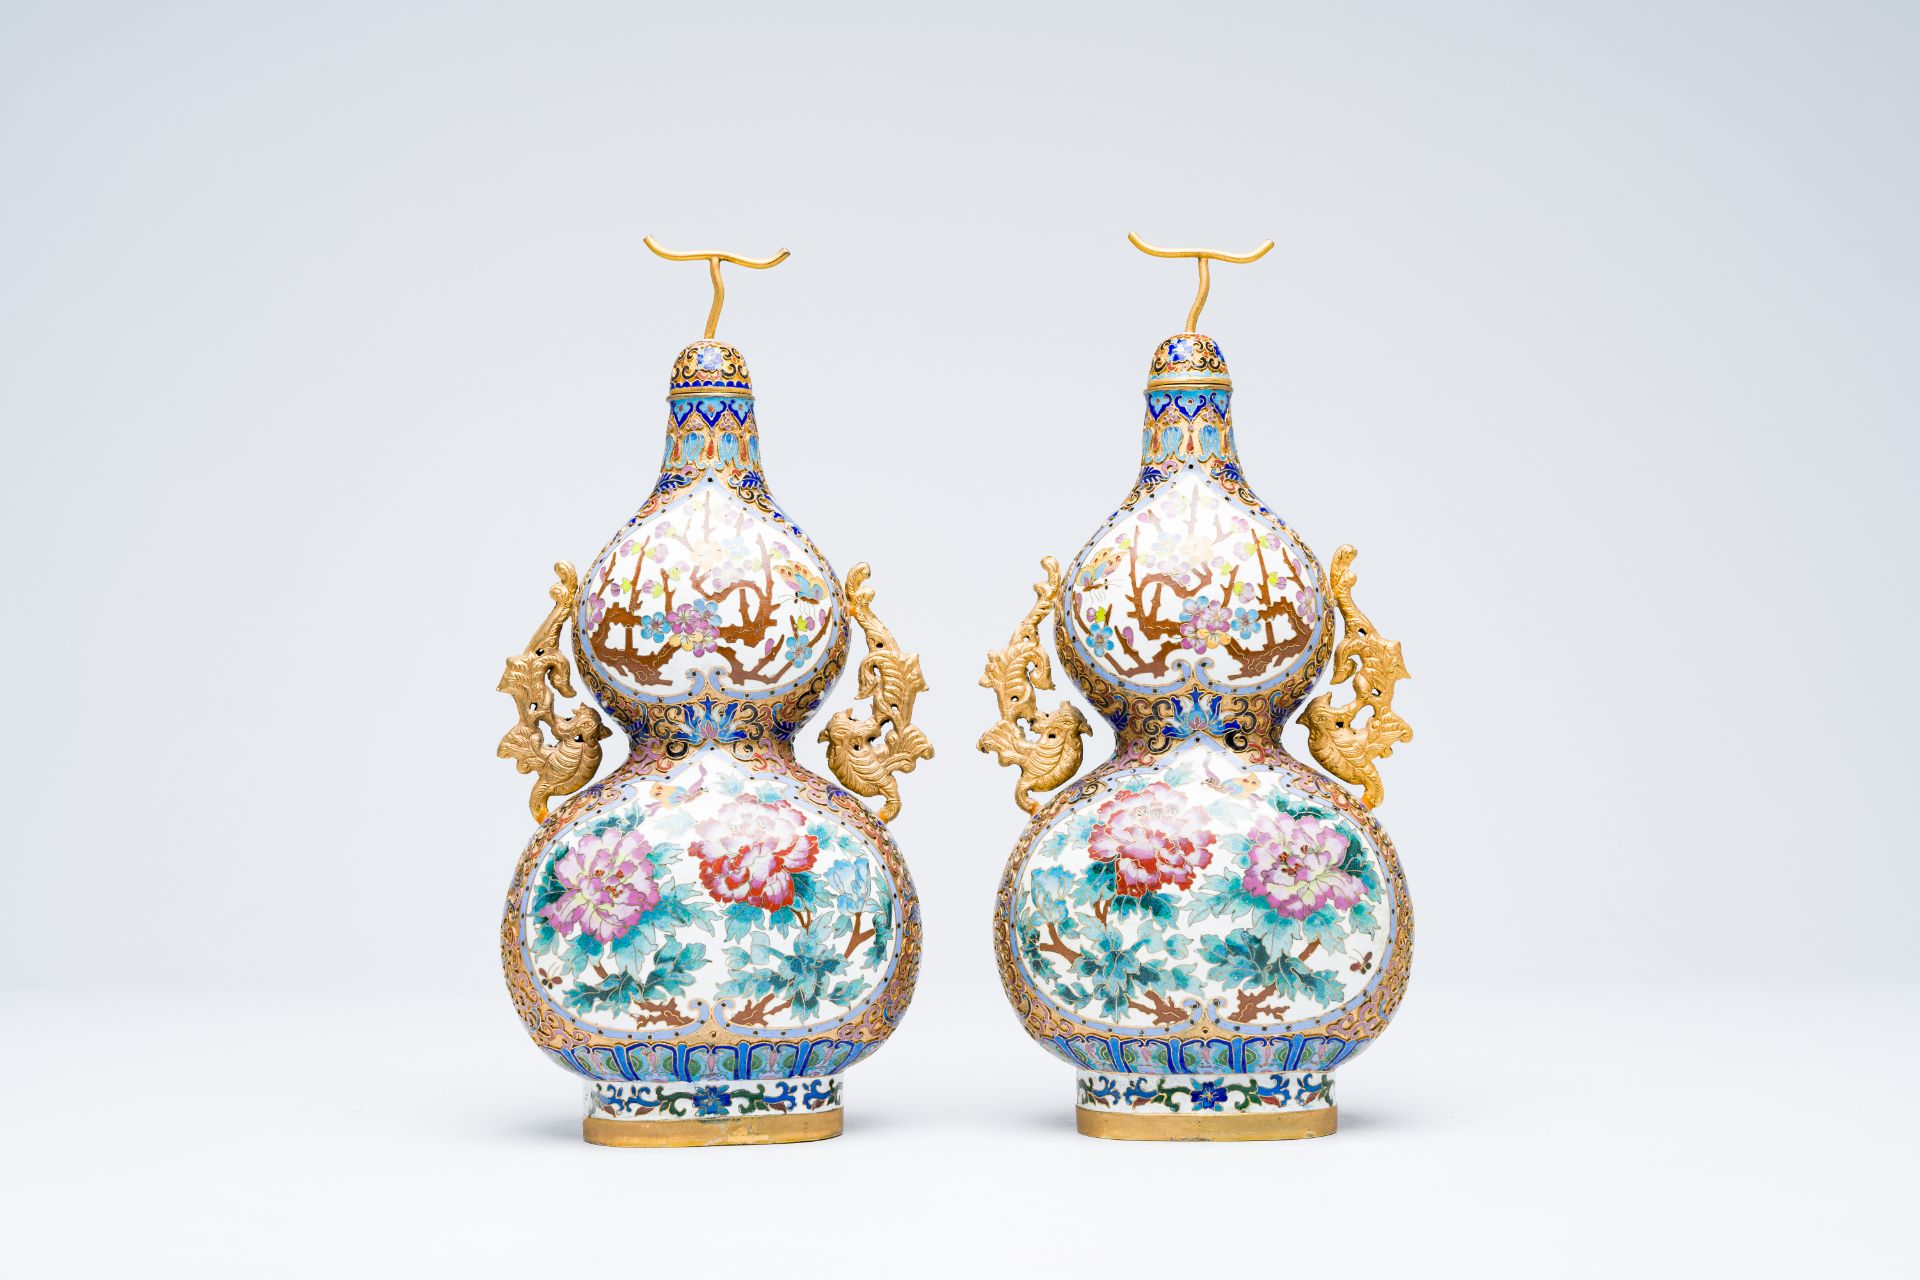 A pair of Chinese cloisonne double gourd vases on wooden stands, 20th C. - Image 4 of 9